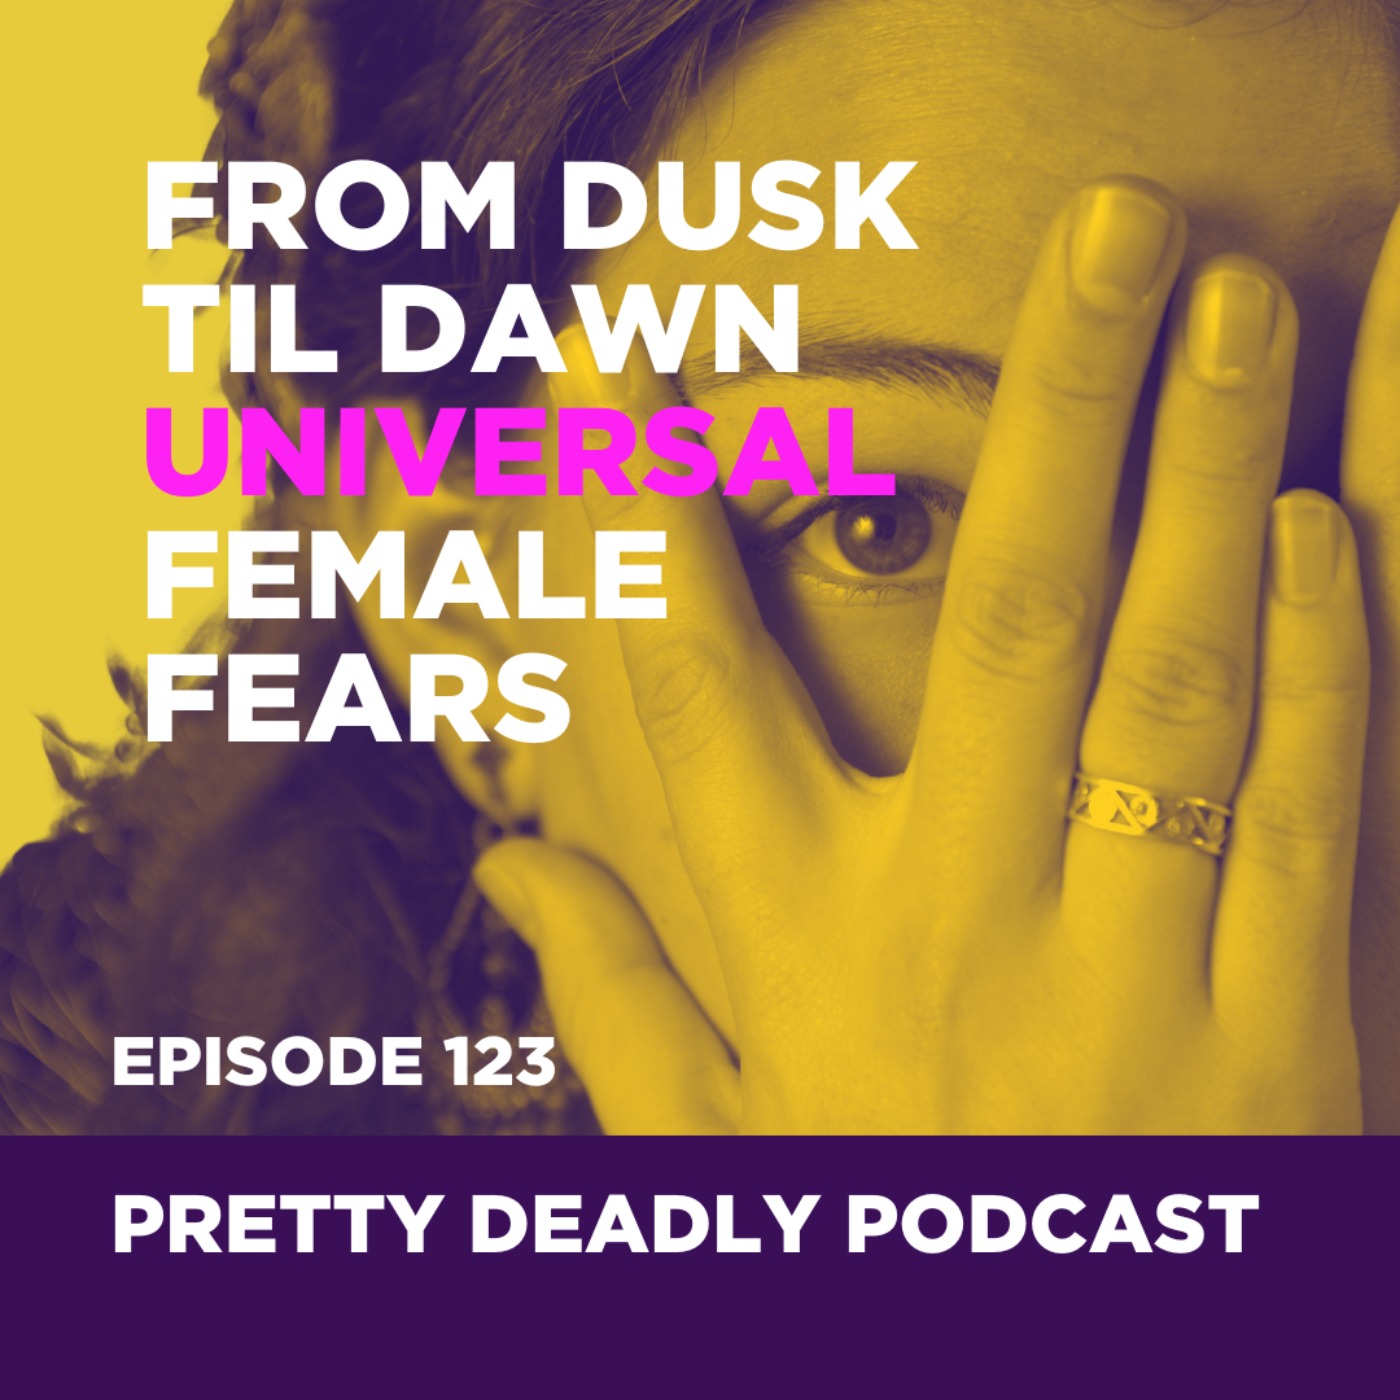 S8 Episode 123: From Dusk Til Dawn | Pretty Deadly Podcast